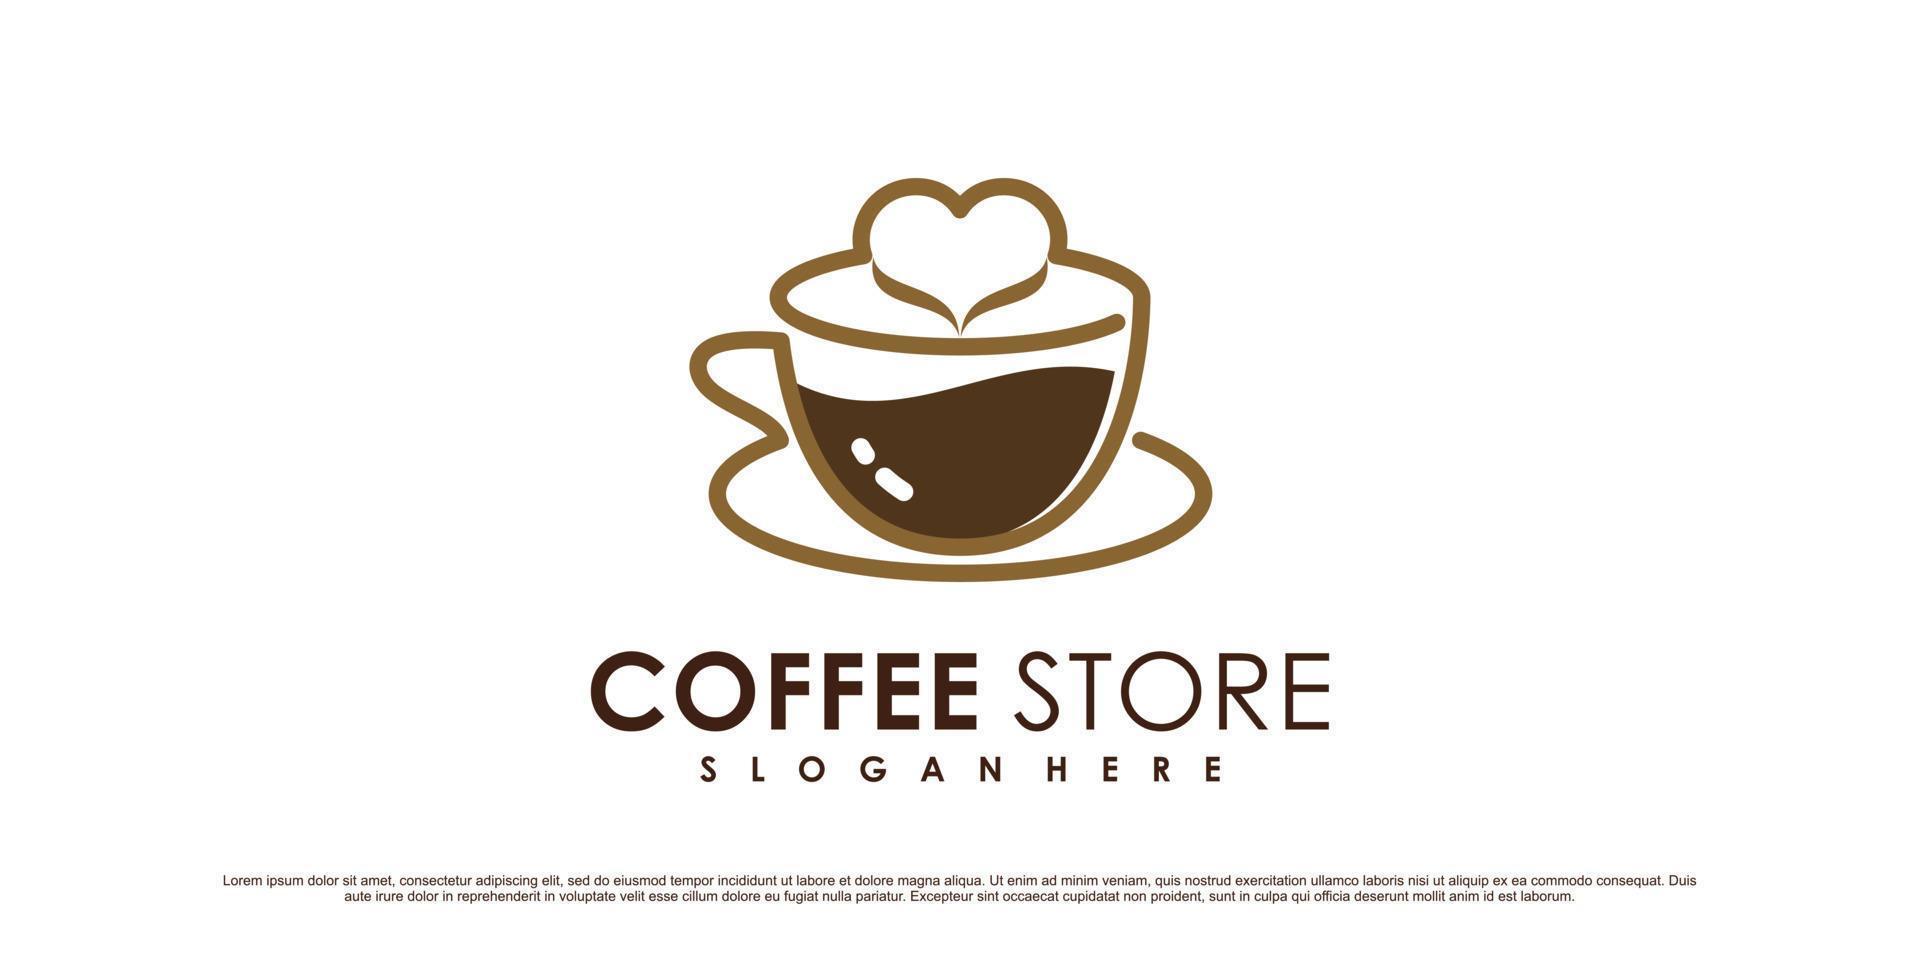 Coffee logo design template for cafe or restaurant with cup icon and creative element vector